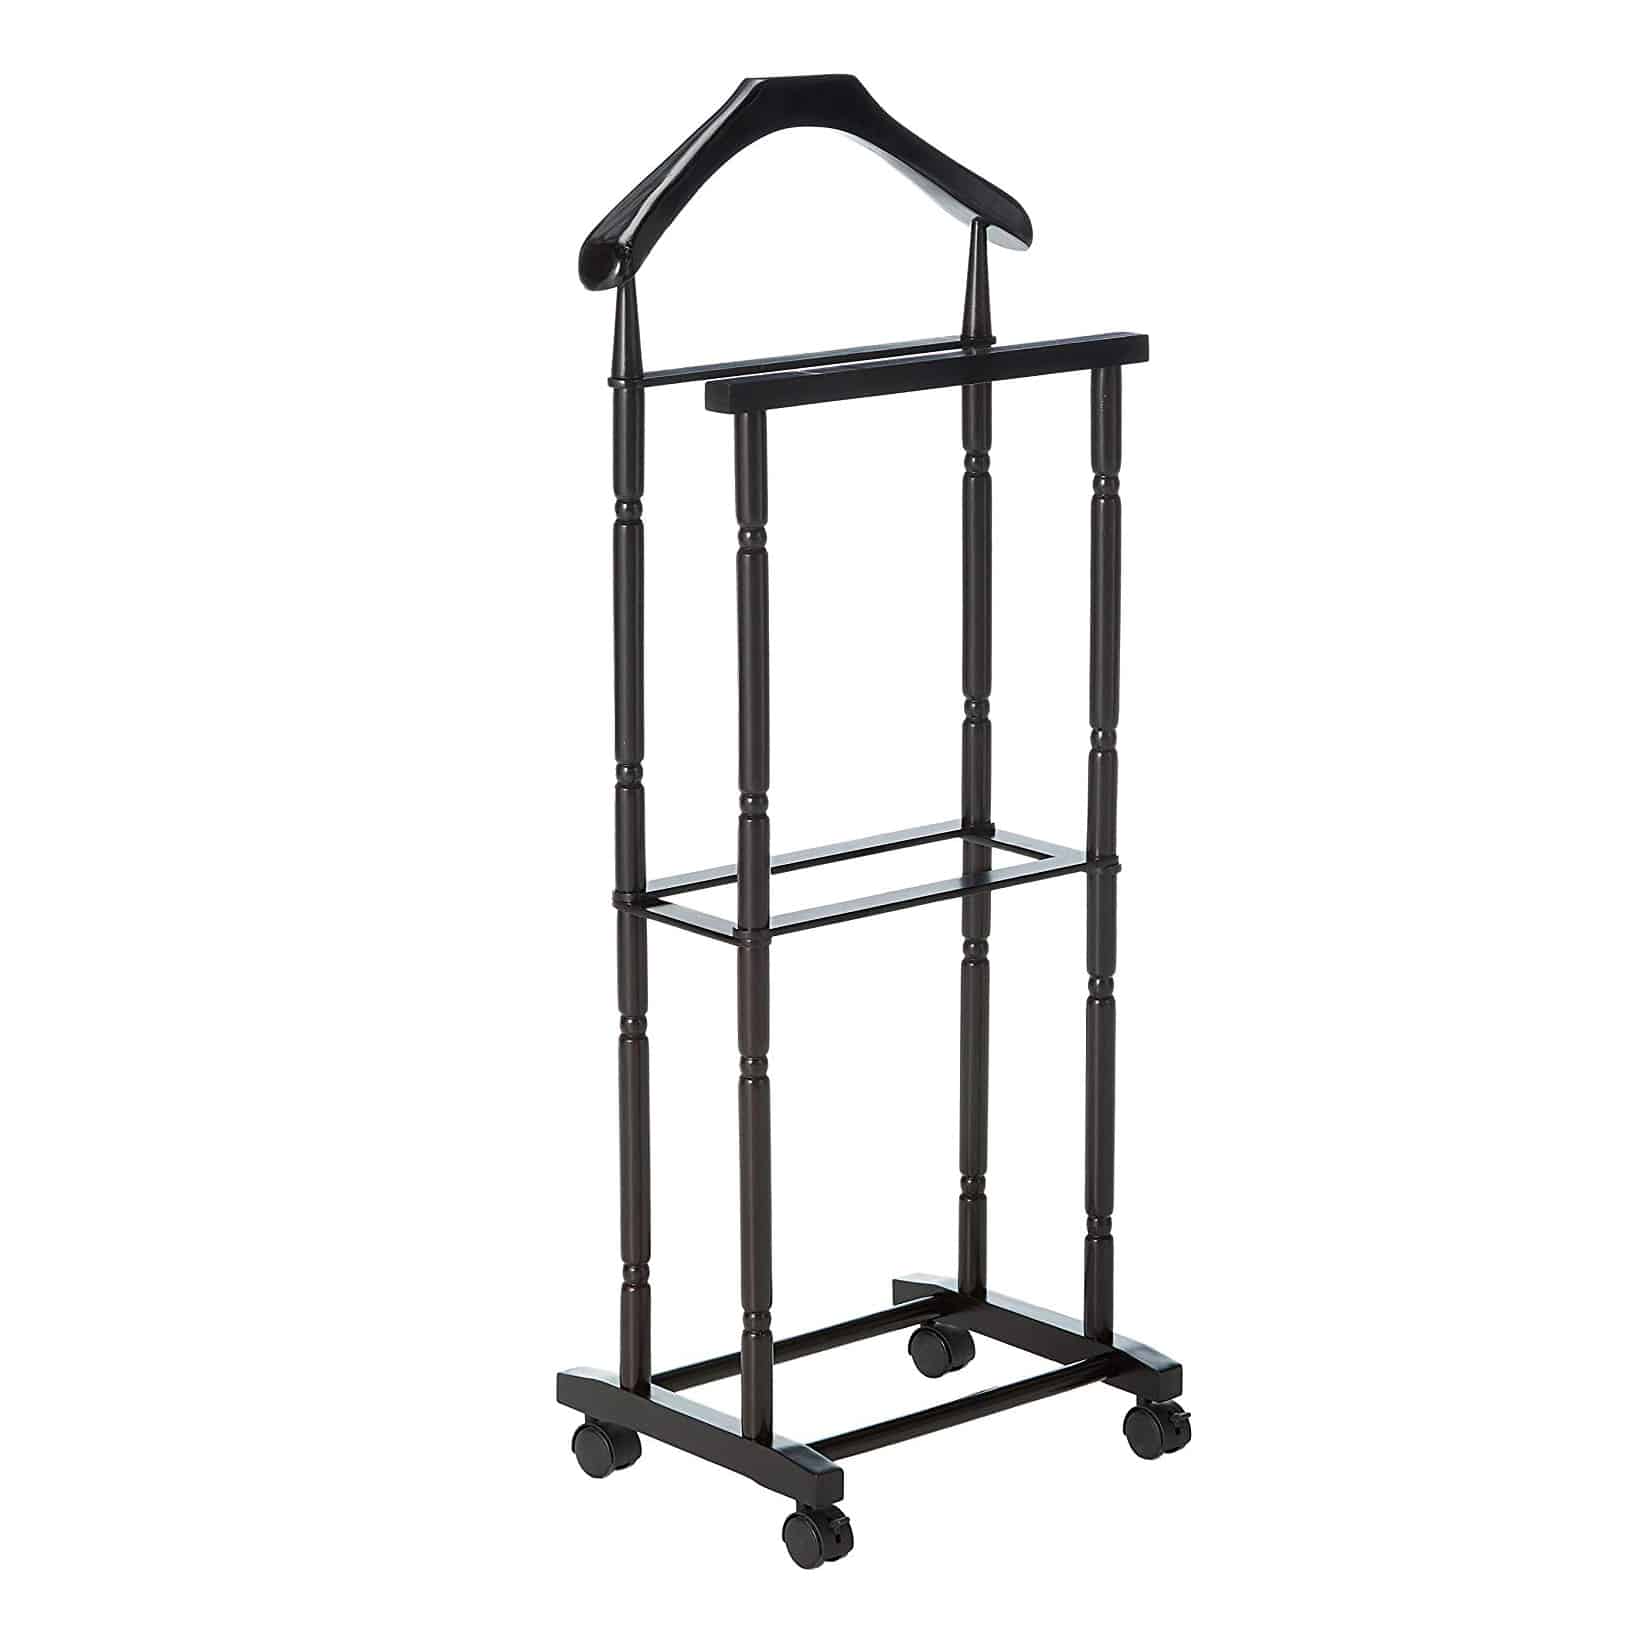 Top 10 Best Valet Stands in 2023 Reviews | Buyer's Guide